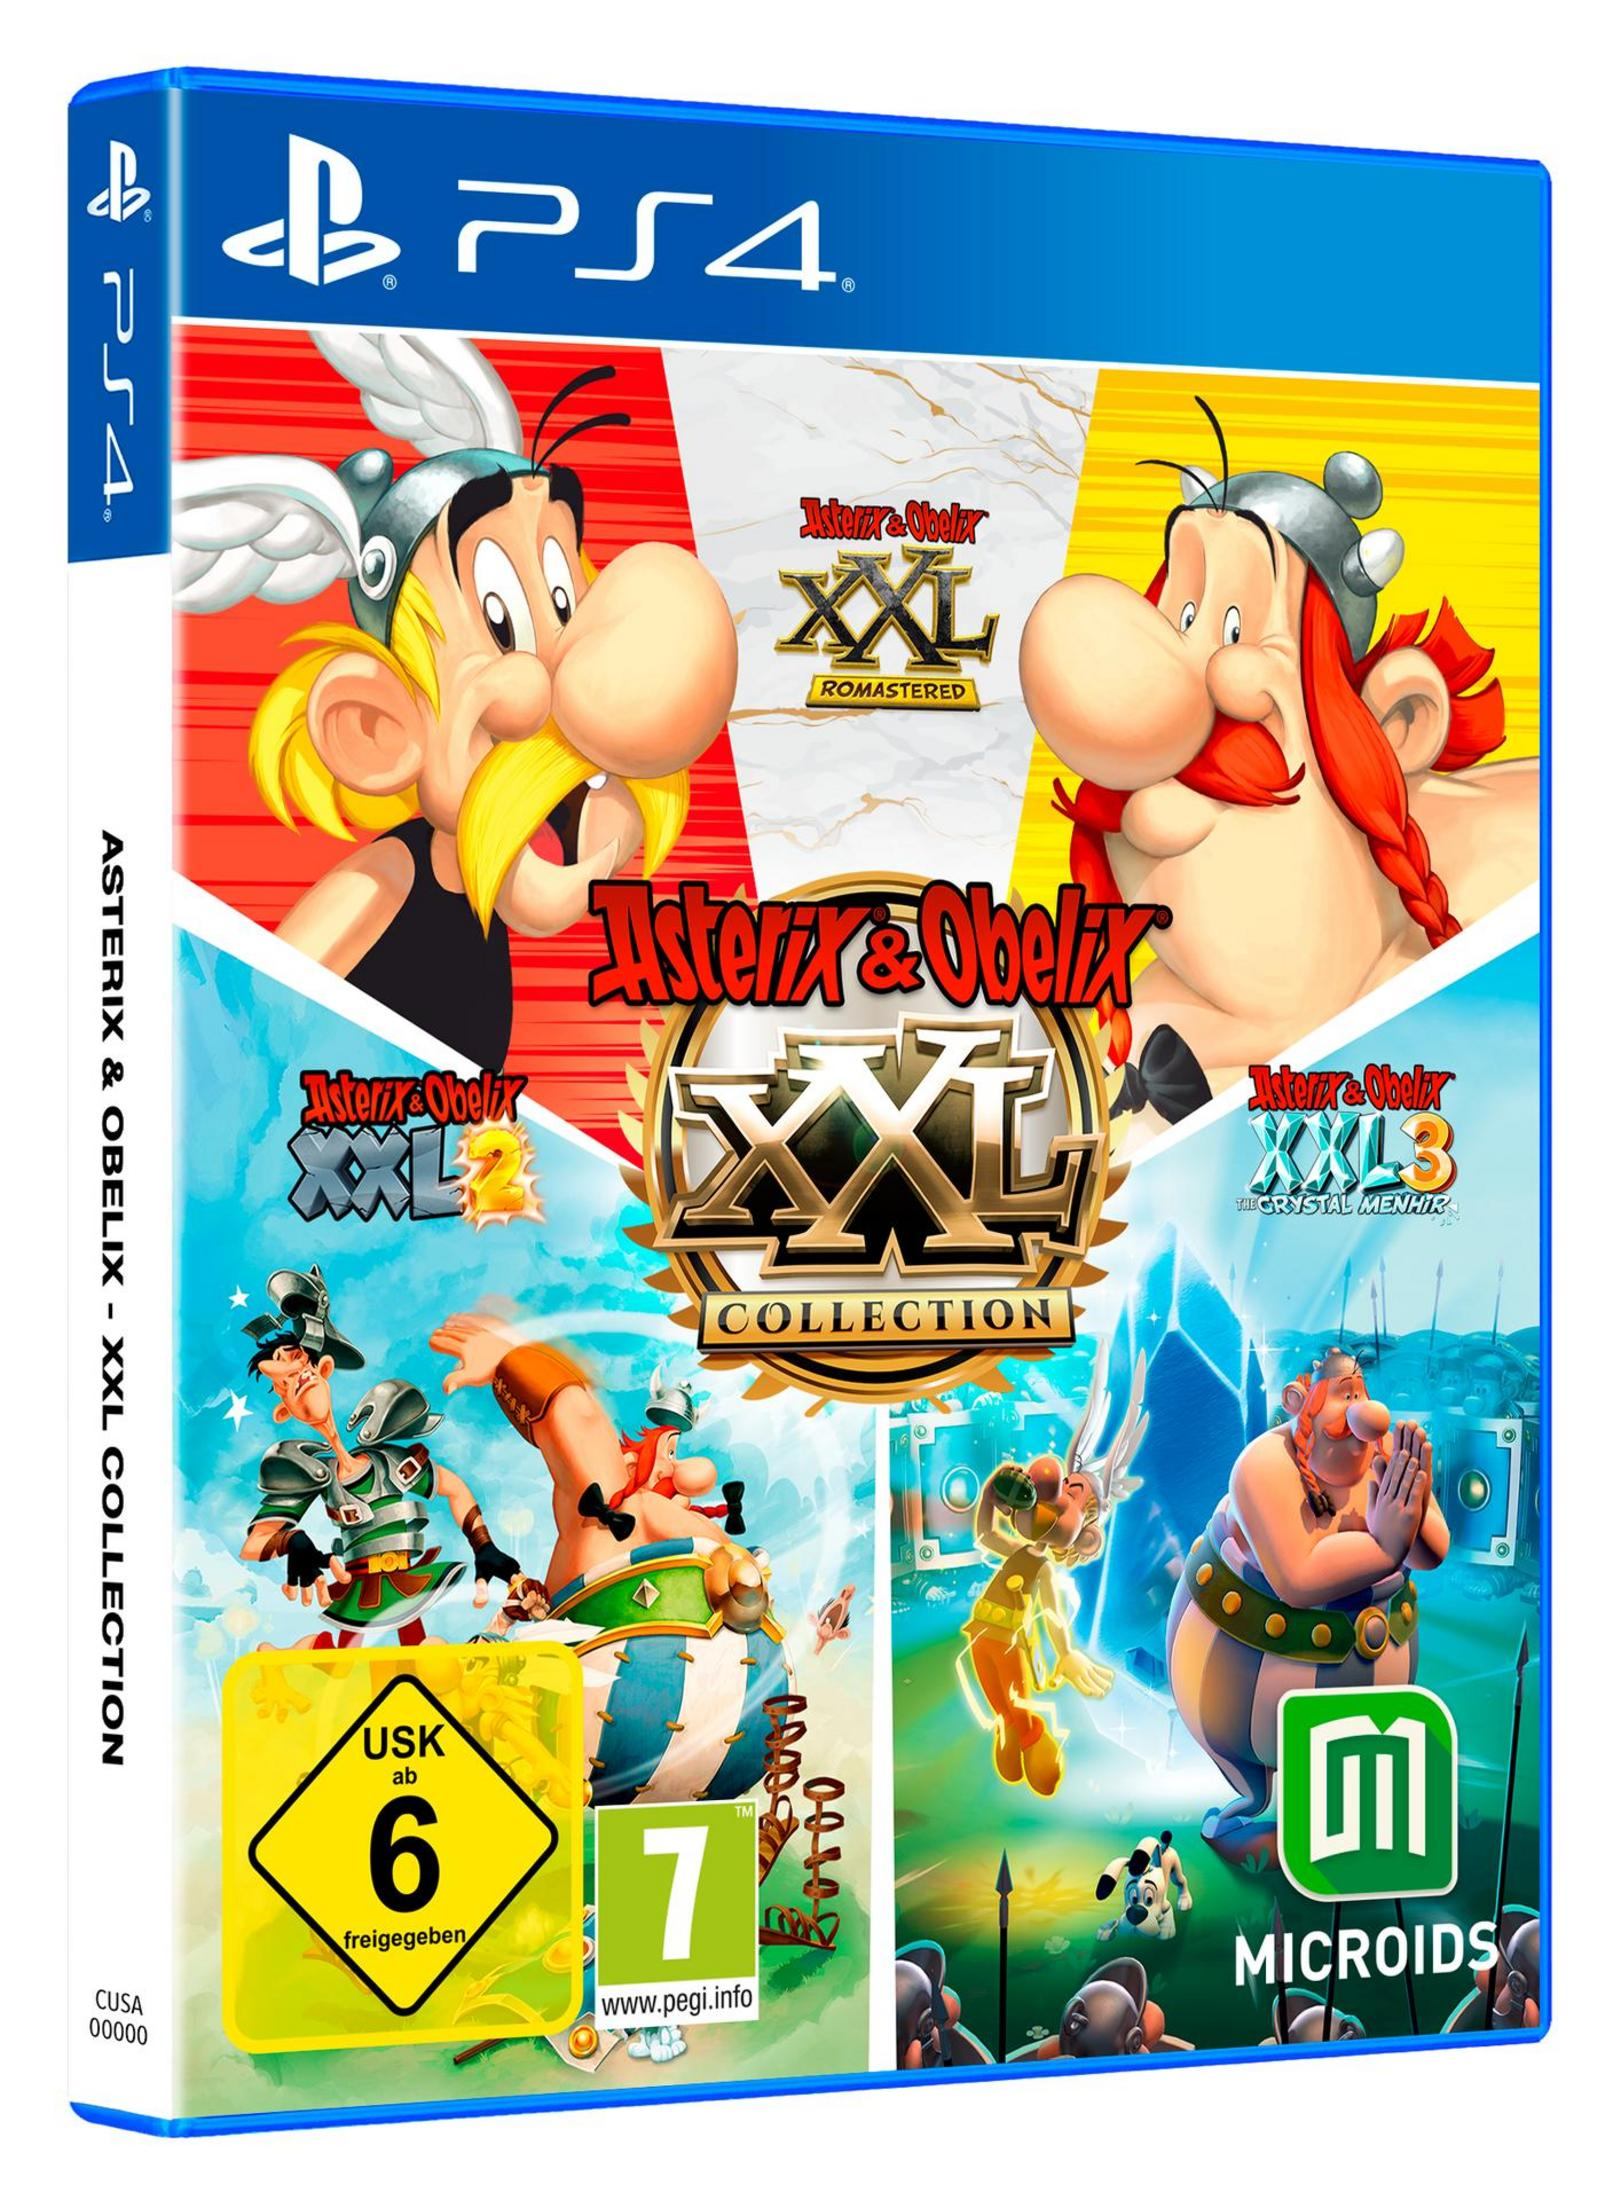 Asterix & Obelix XXL 4] [PlayStation - Collection PS-4